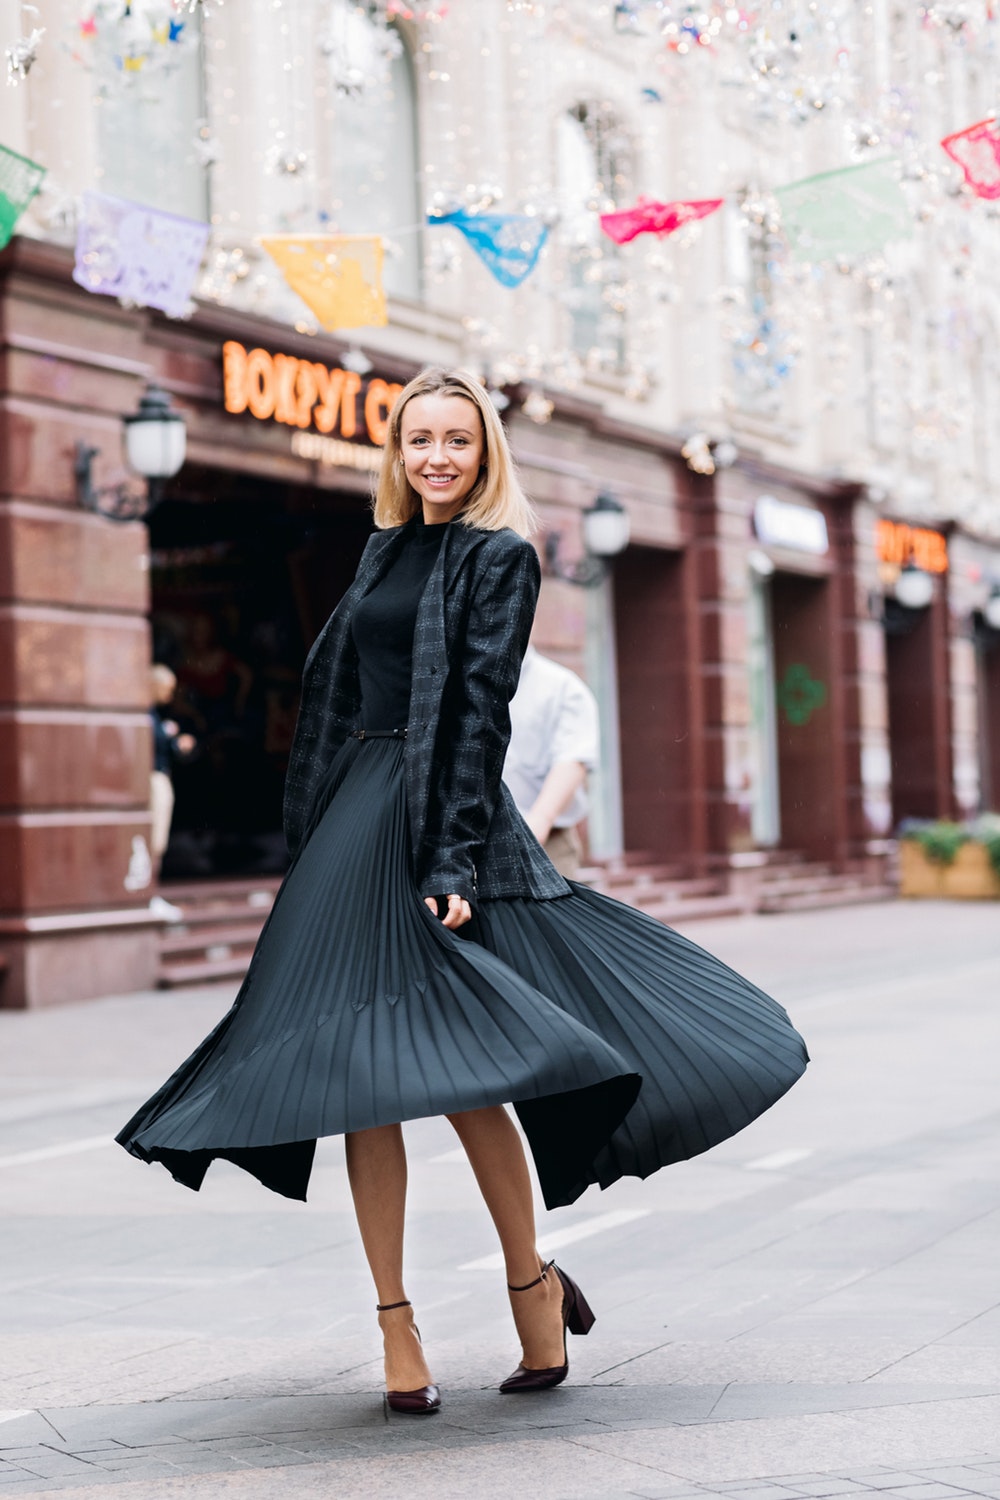 A Guide to Choosing an Outfit for a Formal Fall Event dress